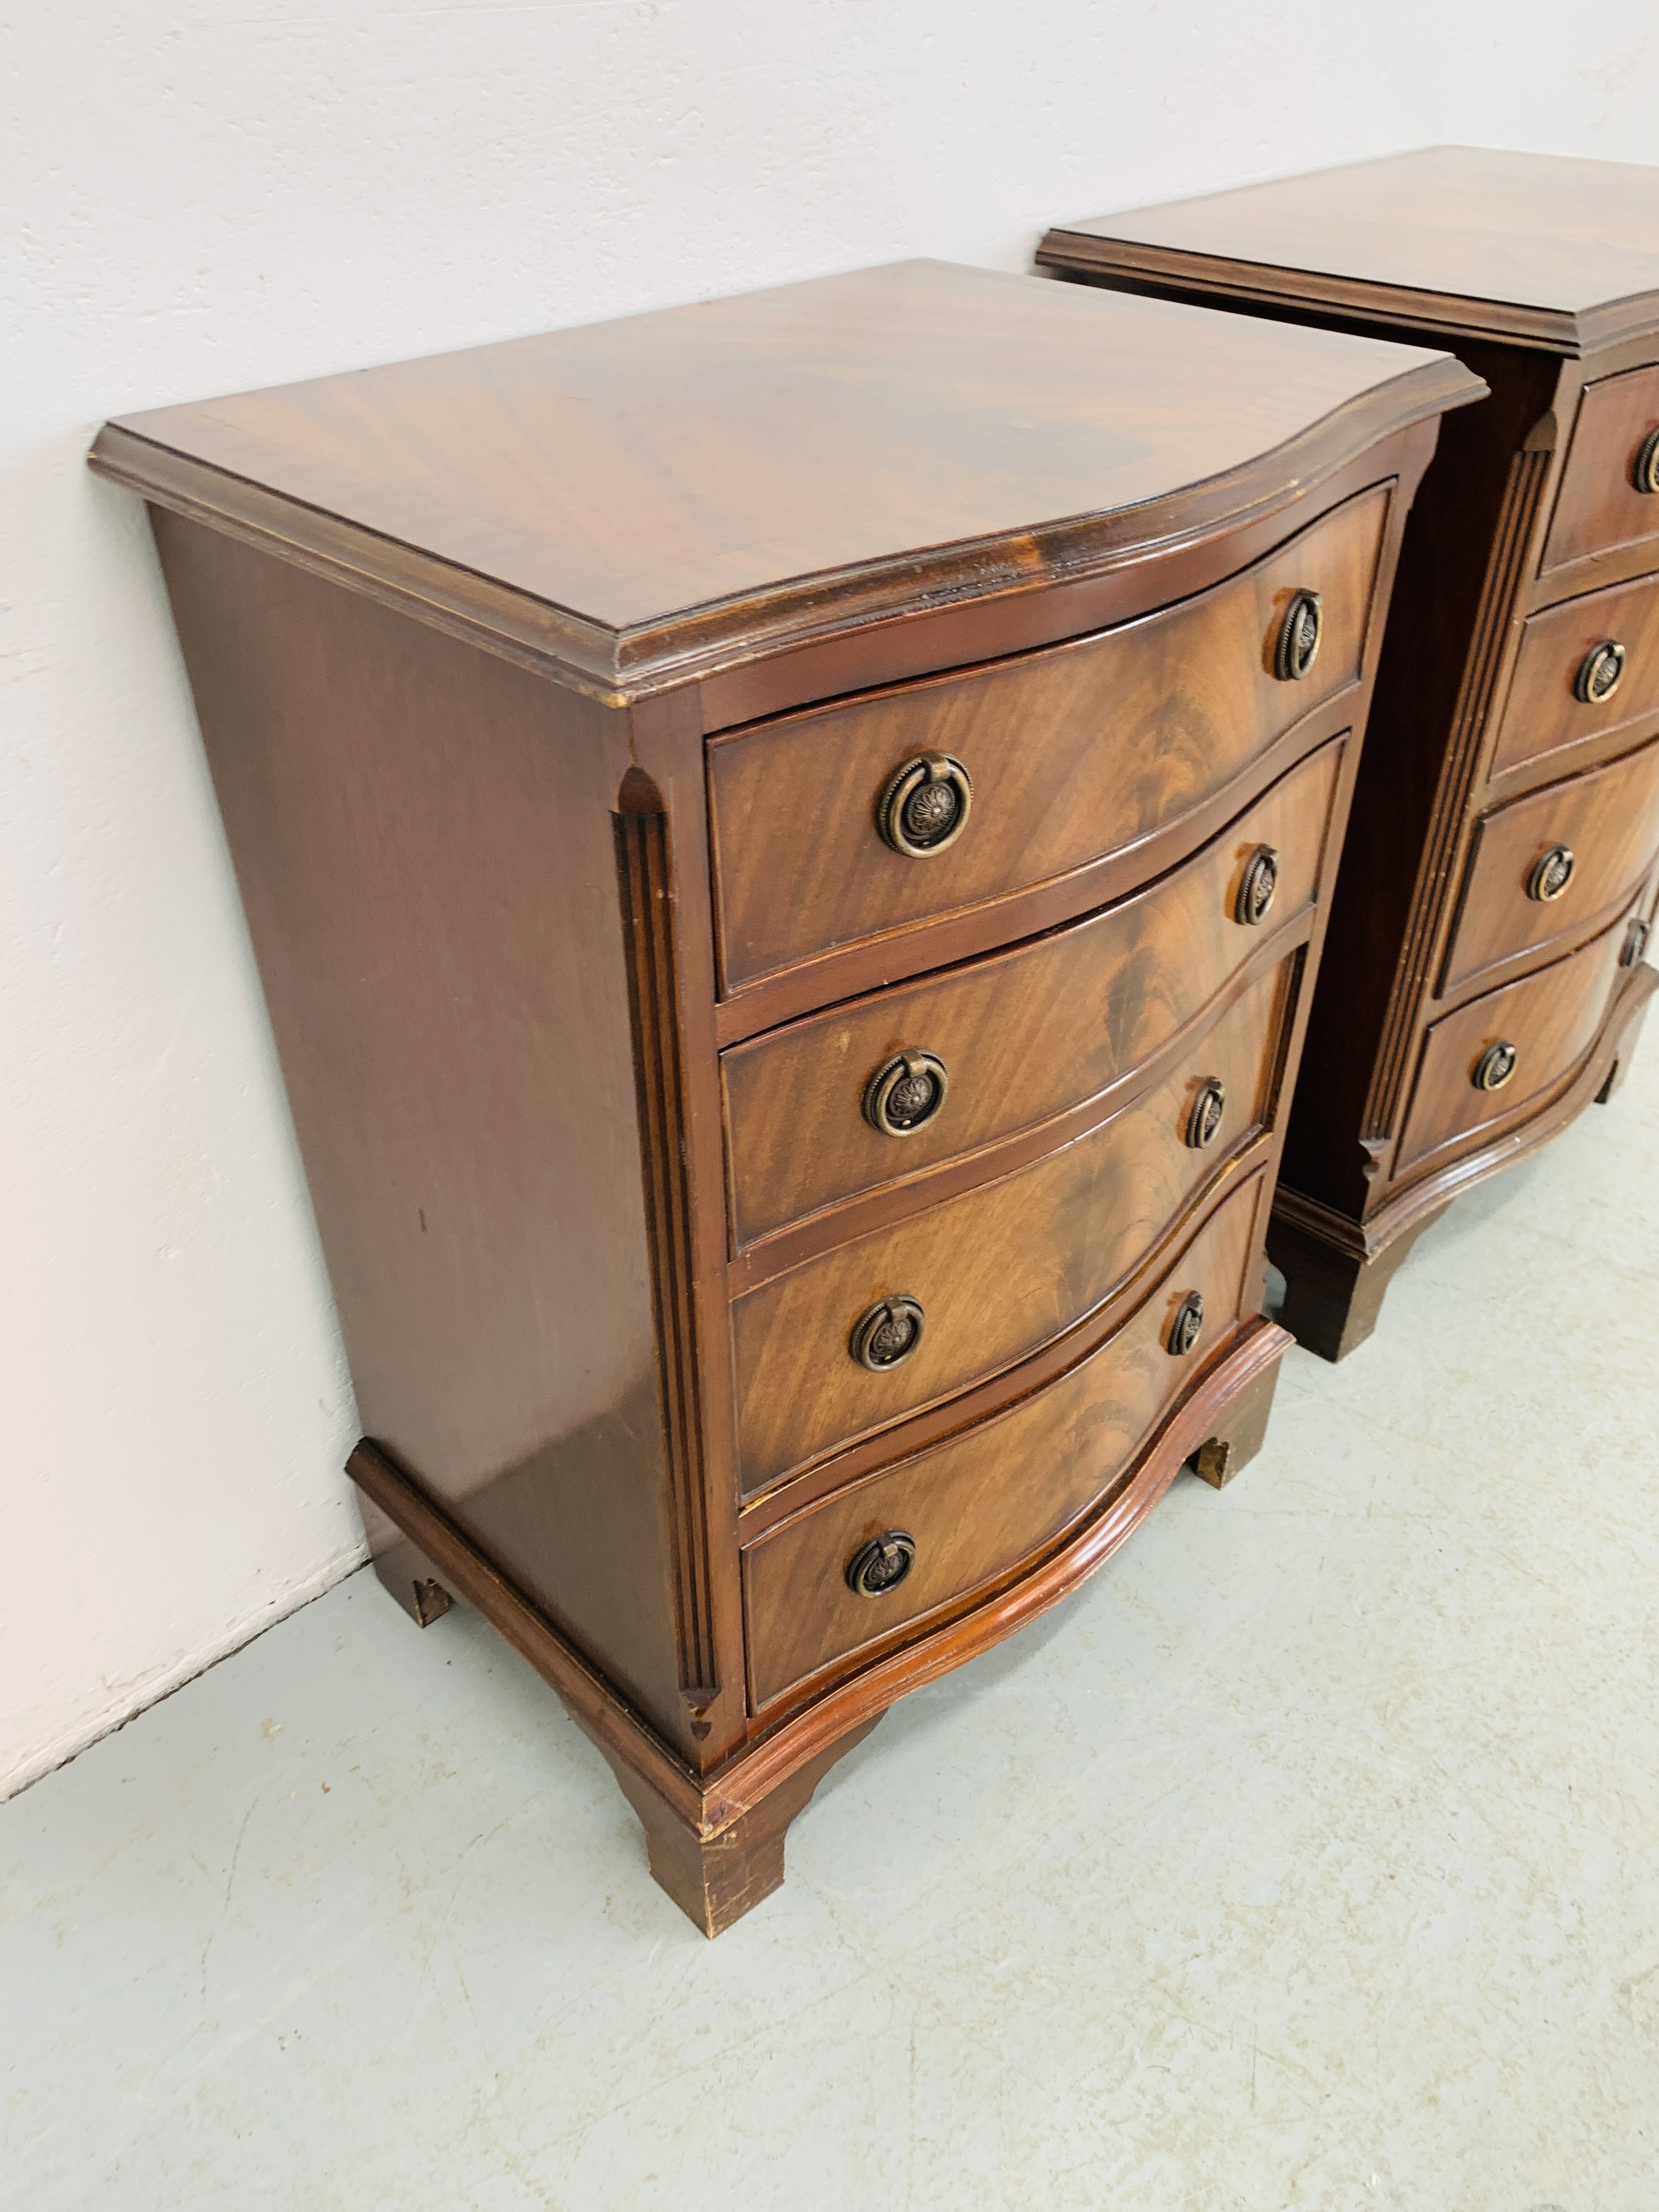 PAIR OF FLAME MAHOGANY FOUR DRAWER CHESTS - W 49CM. D 36CM. H 70CM. - Image 3 of 10